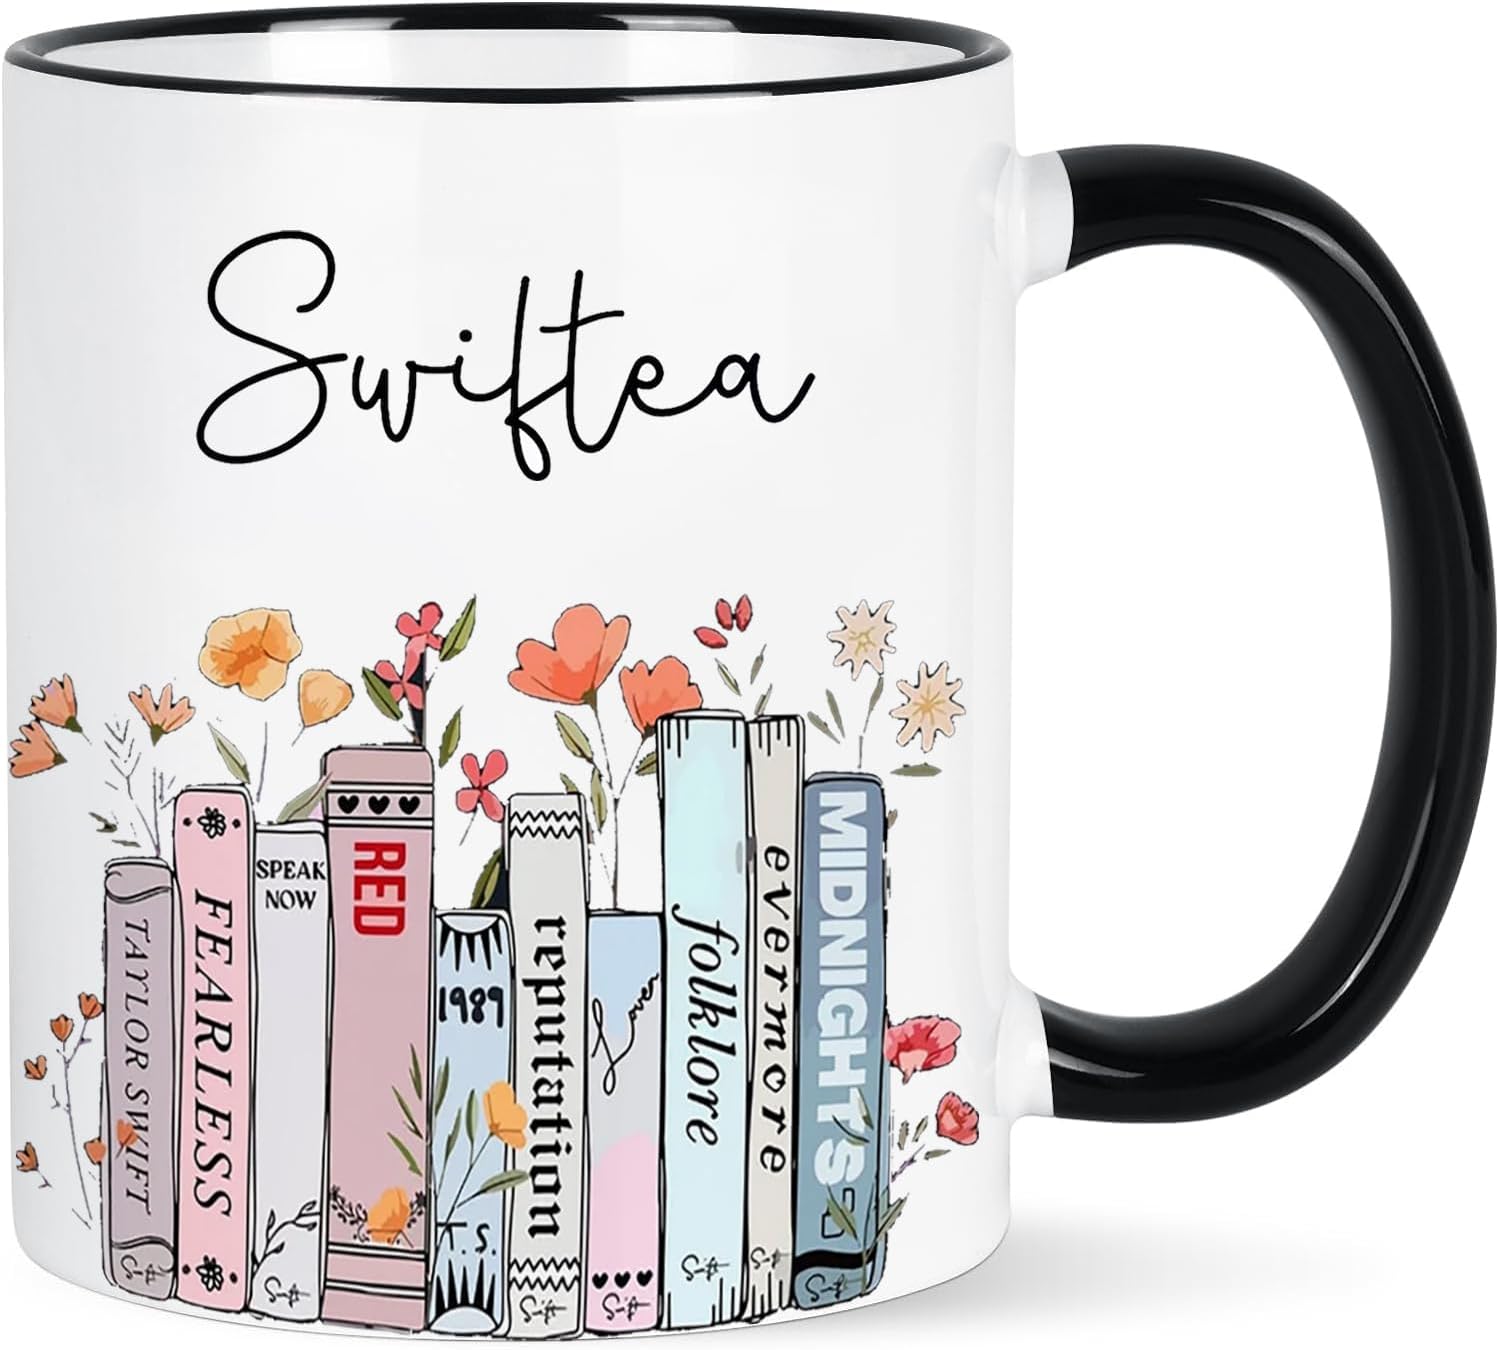 Taylor Swift Mug - Taylor Swift Tumbler Cup Singer Fans,  Taylor Swift Eras Mug Swiftea Tea Mug - Merchandise for Taylor Fans Women and Girls